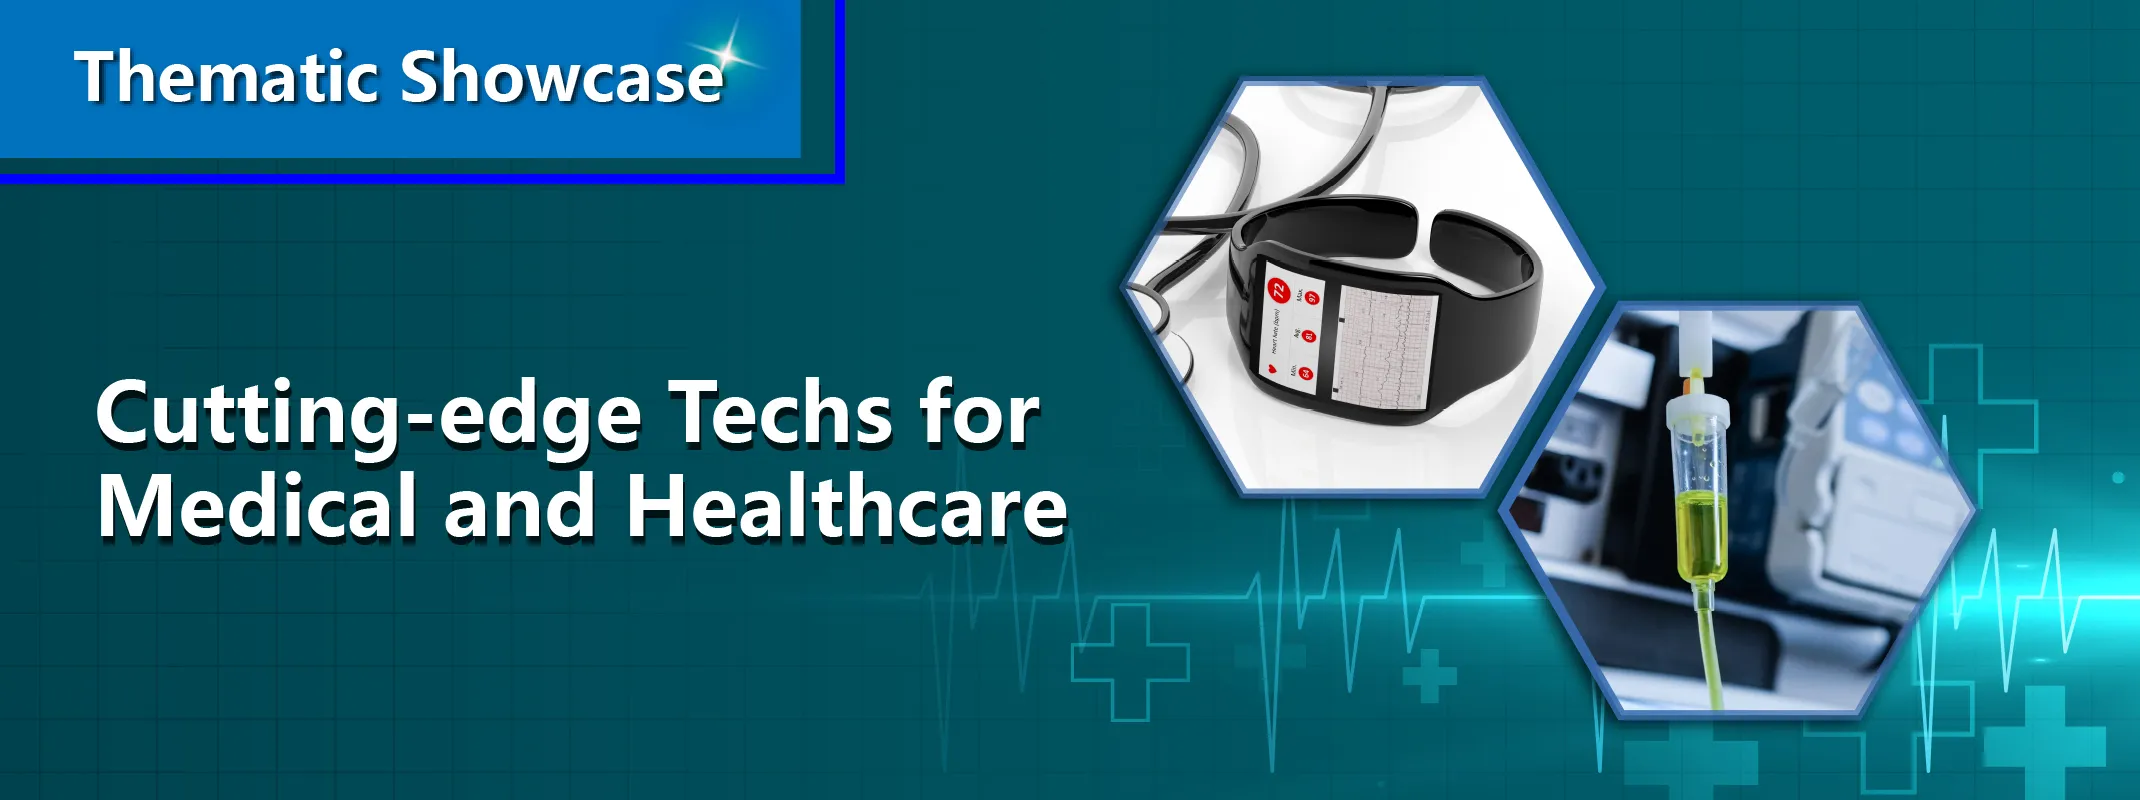 Cutting-edge Techs for Medical & Healthcare